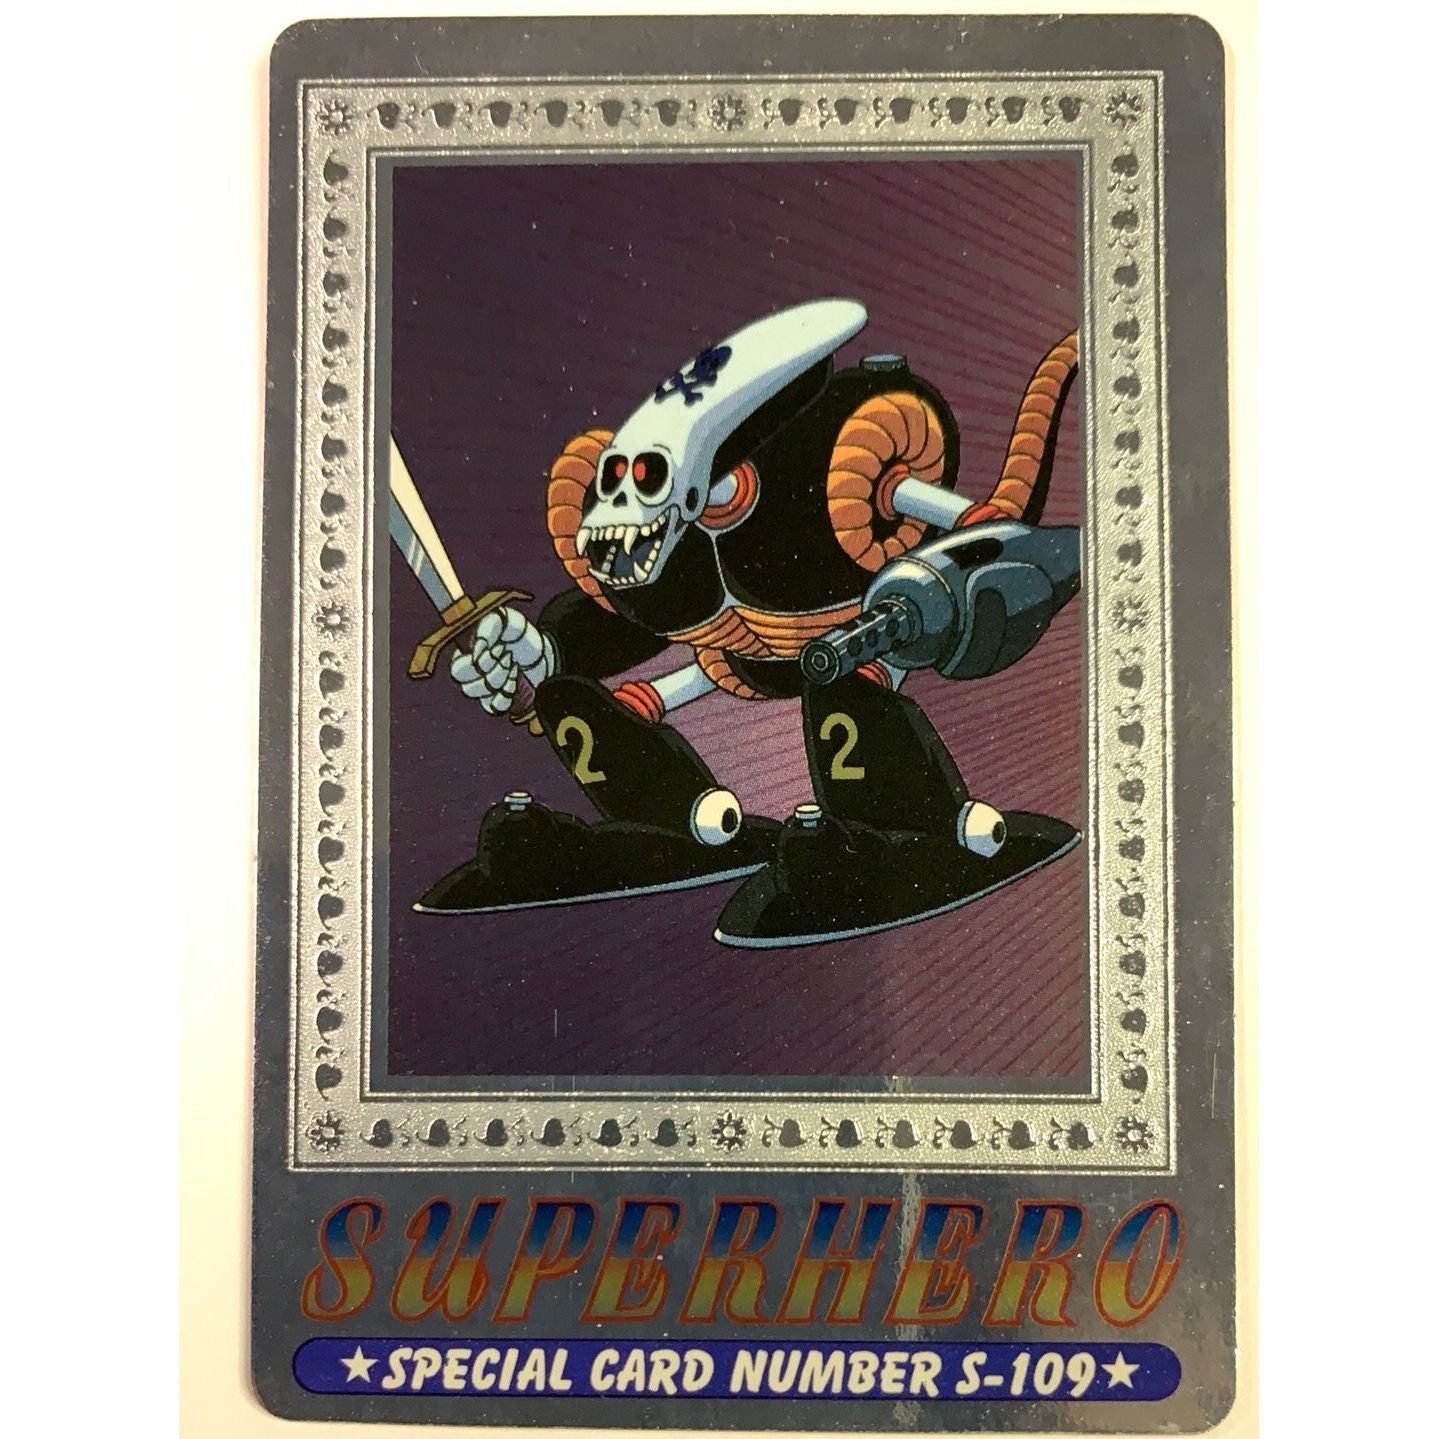  1995 Cardass Adali Super Hero Special Card S-109 Silver Foil  Local Legends Cards & Collectibles